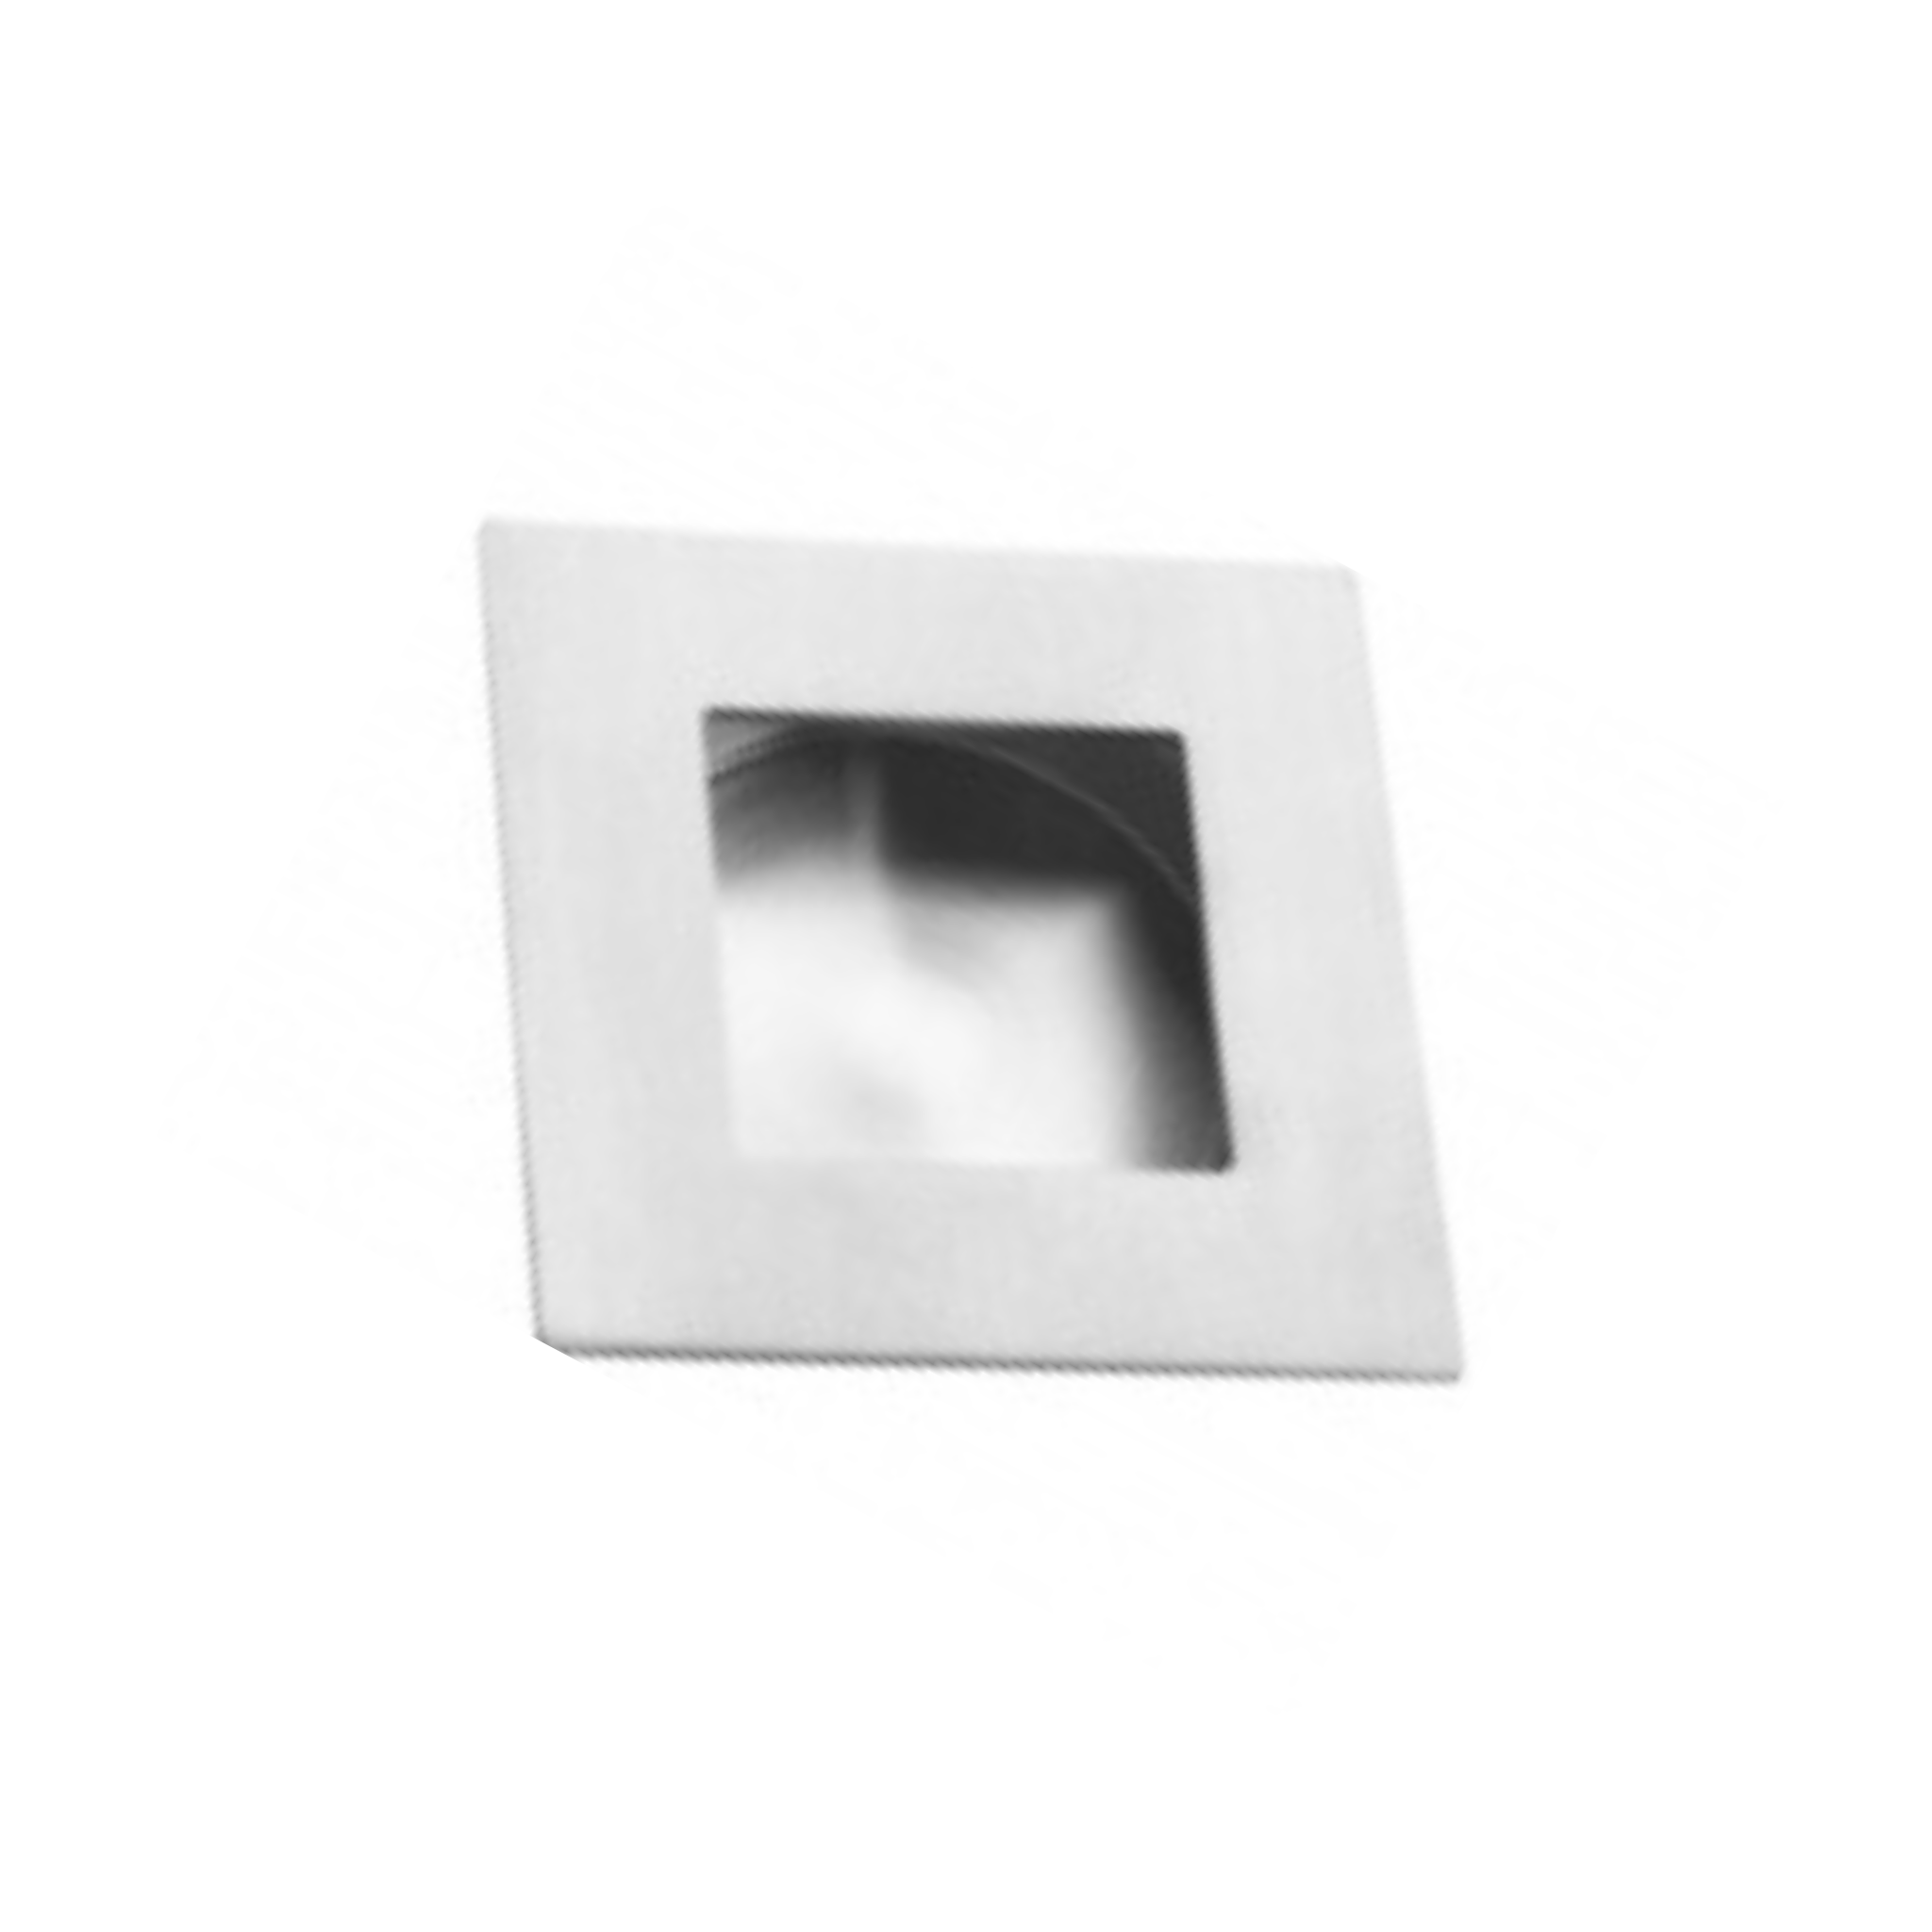 QS4455/2, Flush Pull, Square, 70mm (l) x 70mm (w), Stainless Steel, QS